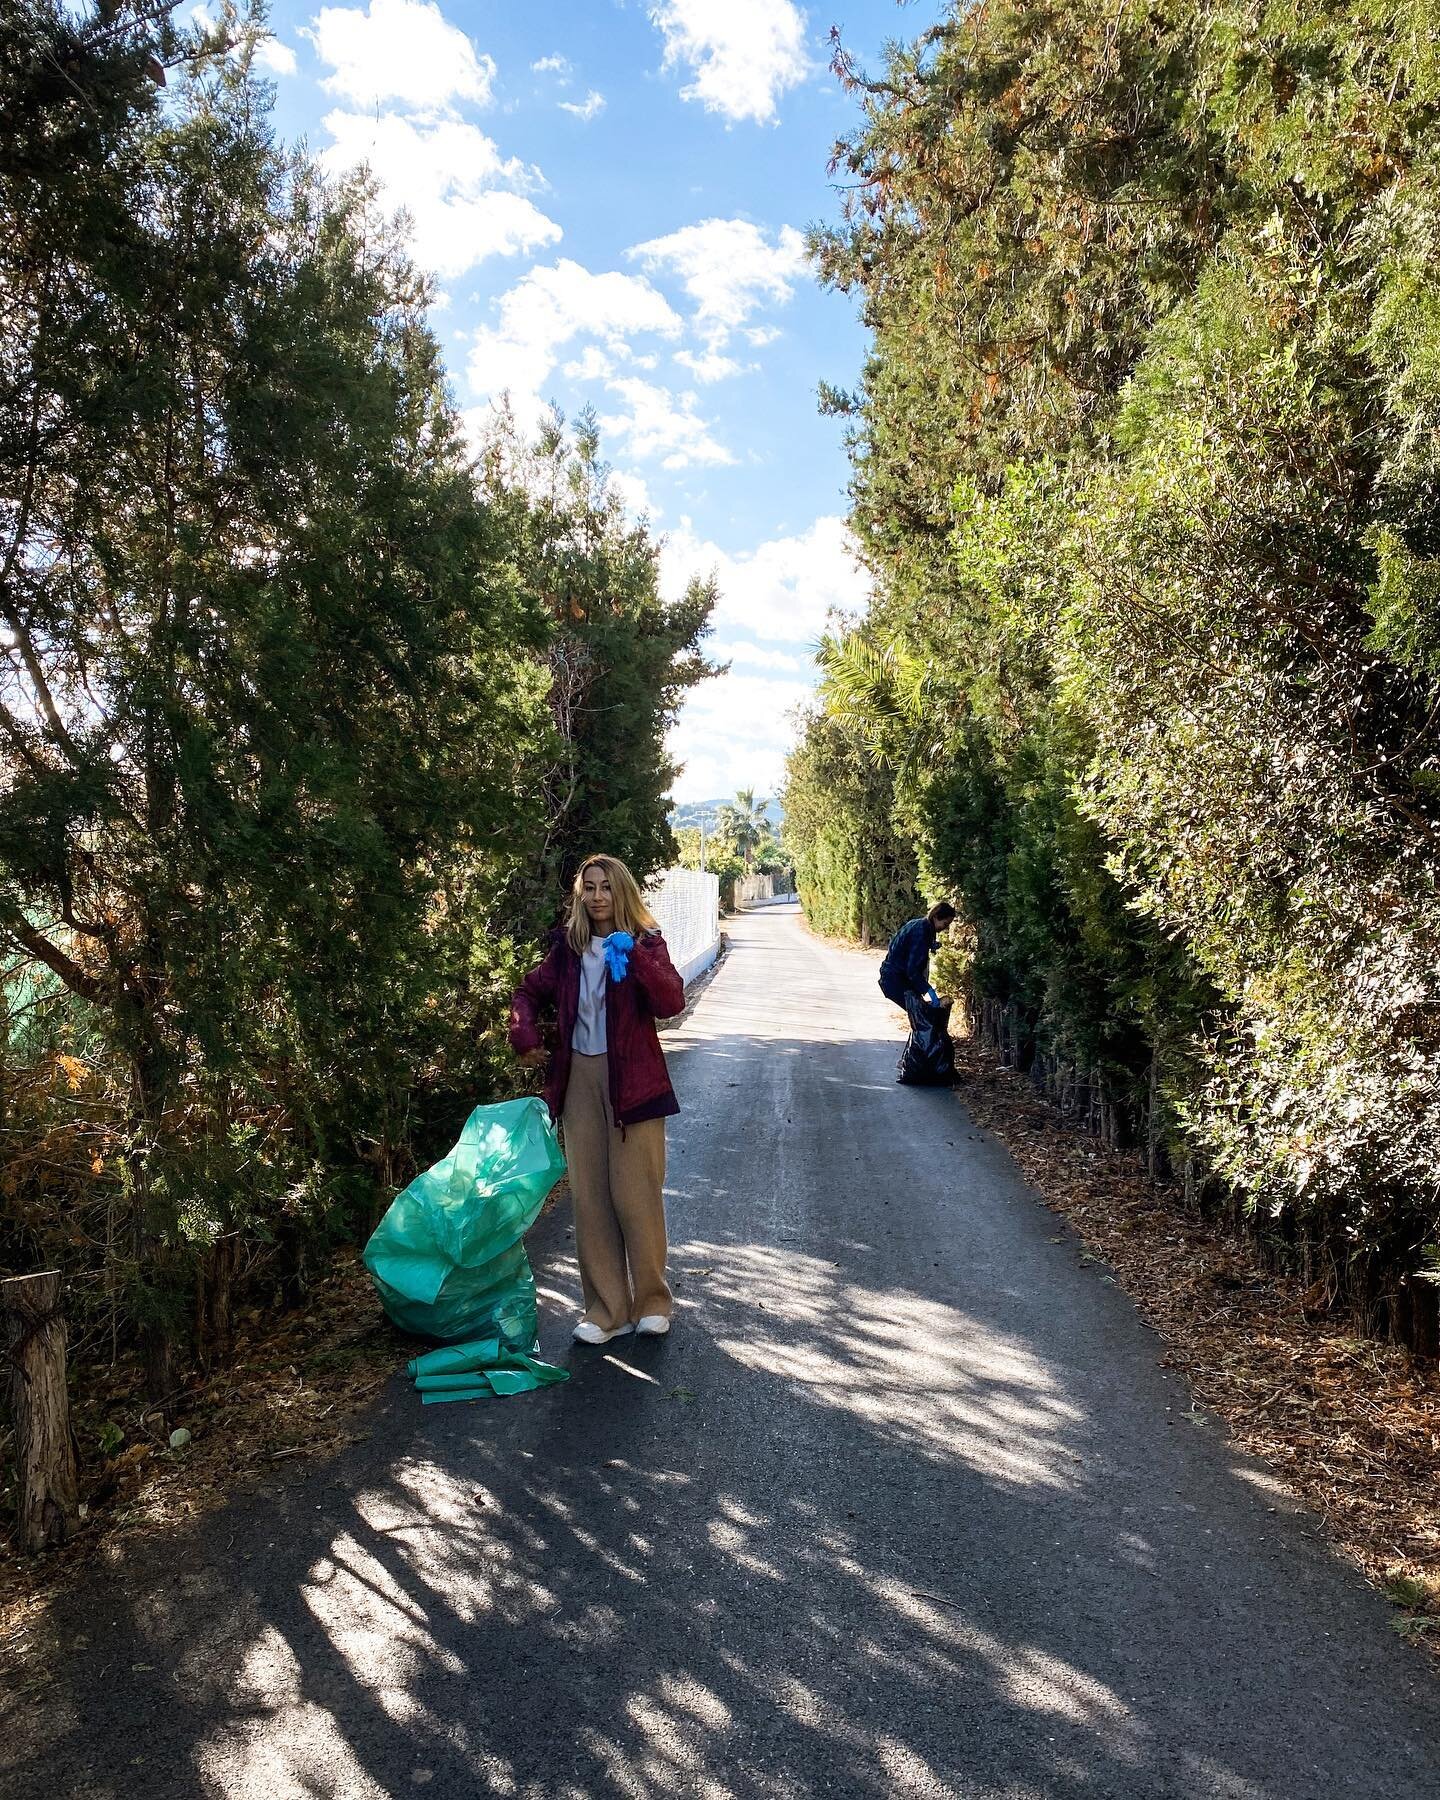 🌿 A weekend well spent, and new community faces 🤝 

Our local clean-up event was a testament to the power of coming together for a shared purpose &ndash; creating a cleaner, greener place we all call home. 💚 

From laughter-filled trash pickups to